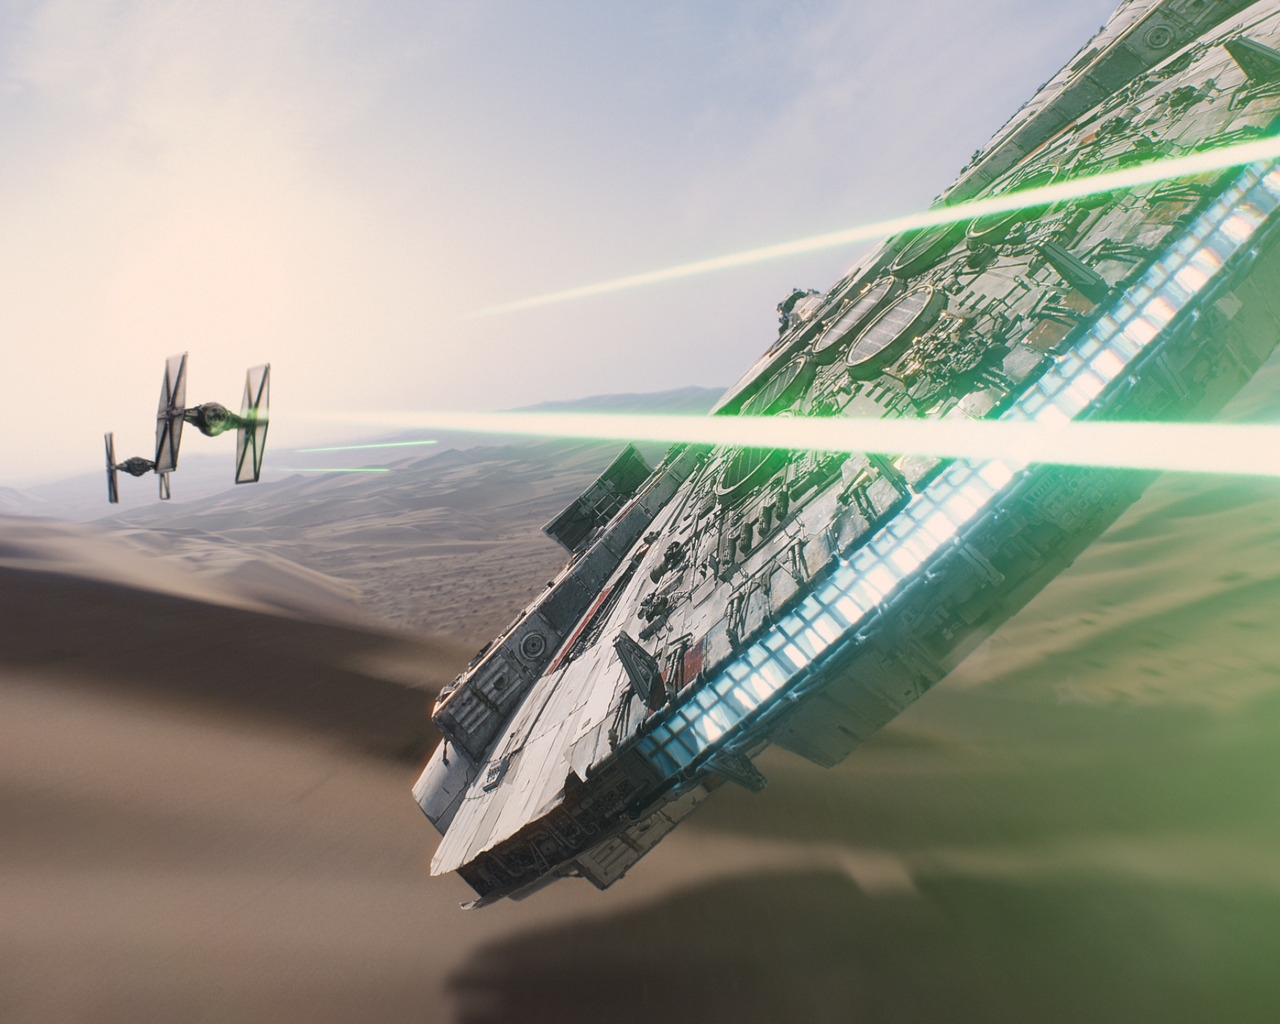 Star Wars The Force Awakens for 1280 x 1024 resolution